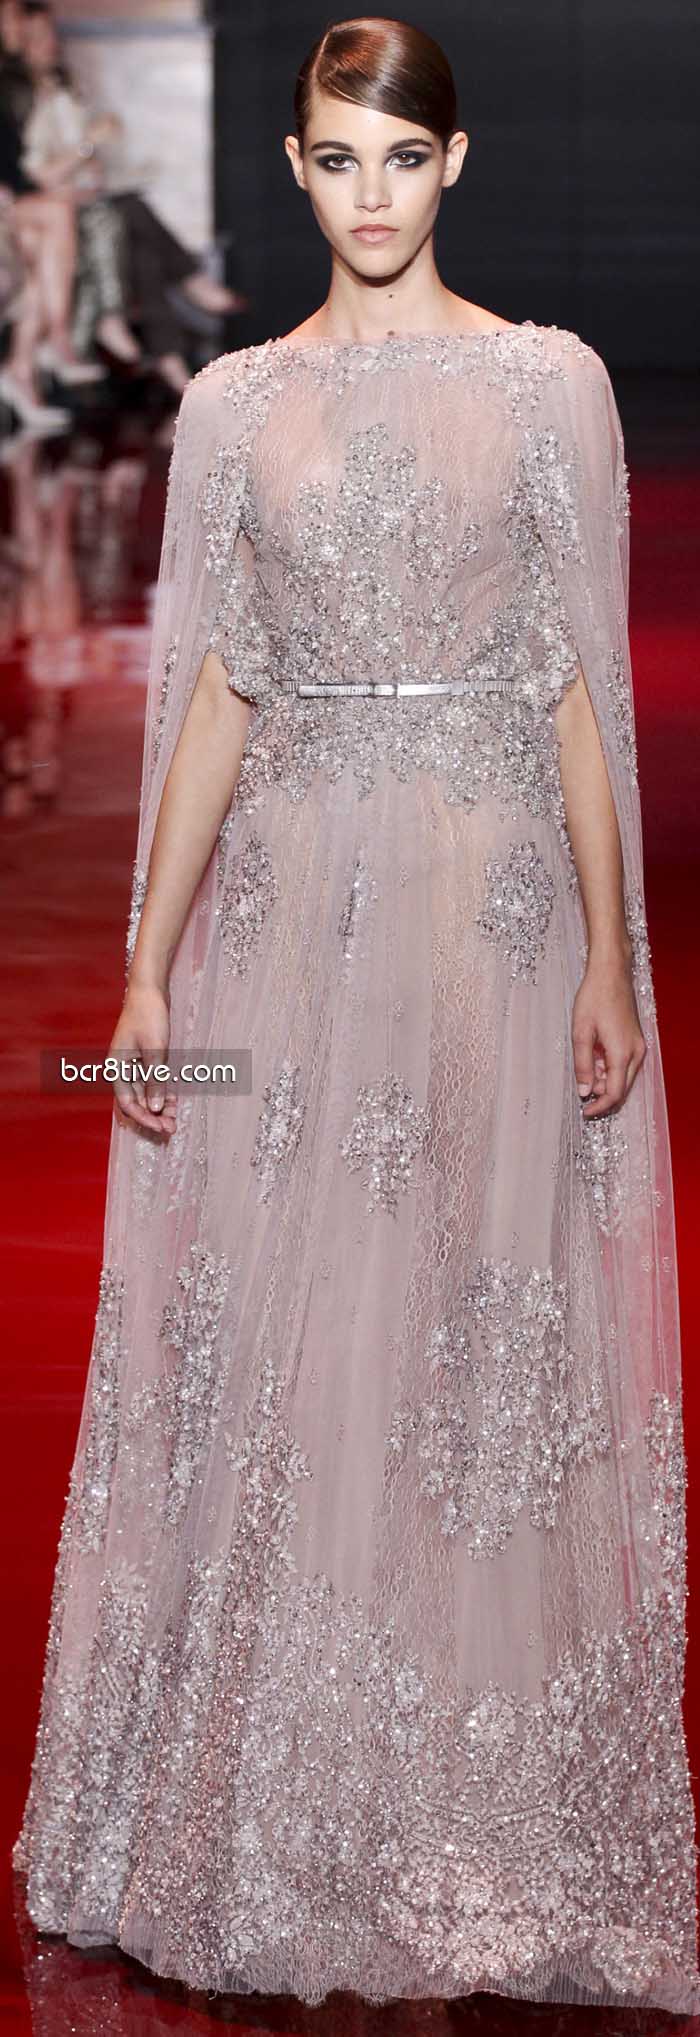 Elie Saab Fall Winter 2013-14 Haute Couture – Be Creative